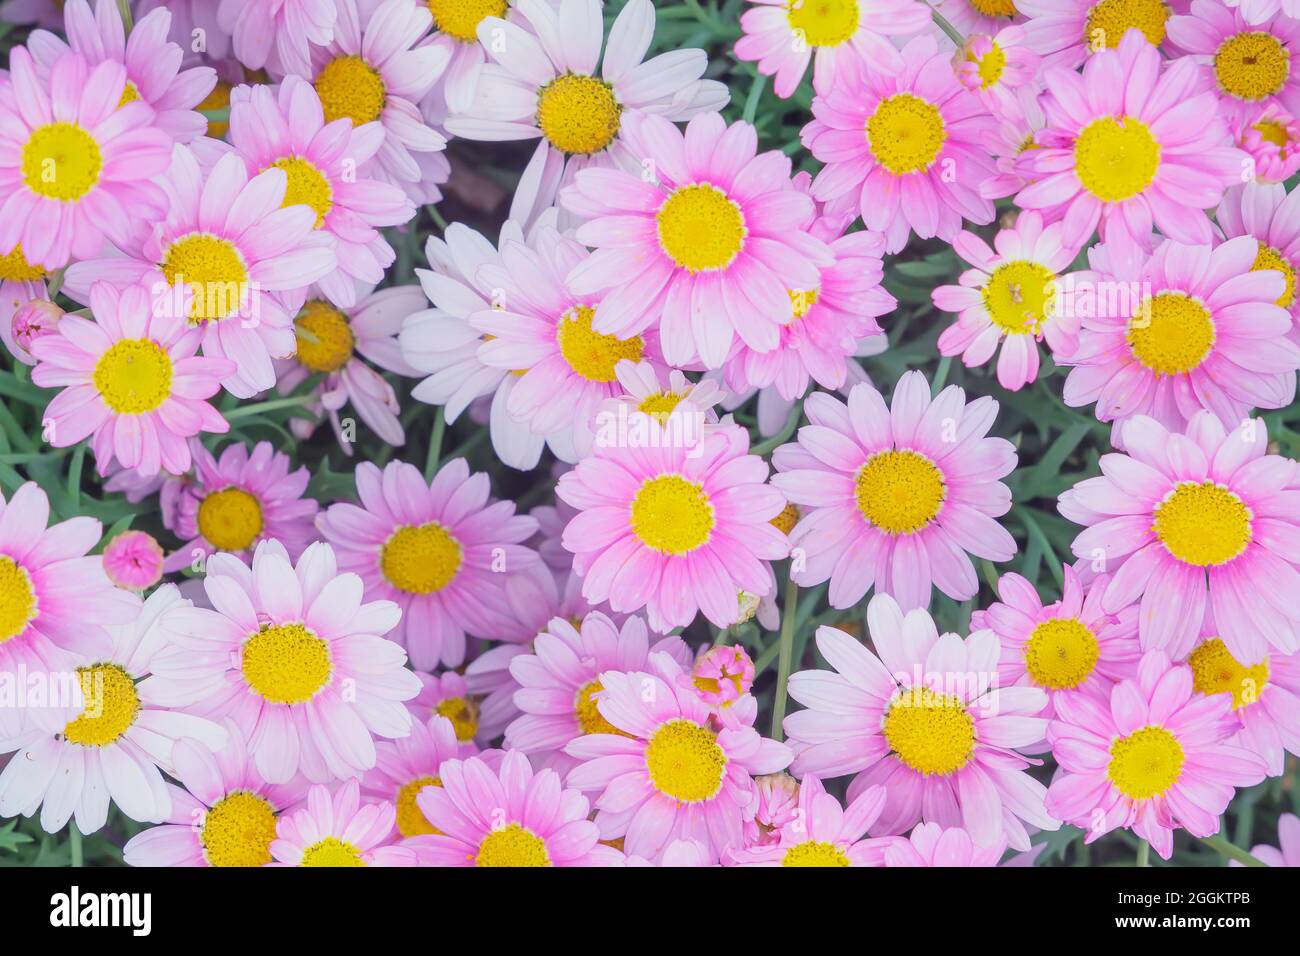 White Daisies and Pink Daisies in full bloom, Genoa, Liguria, Italy Stock Photo